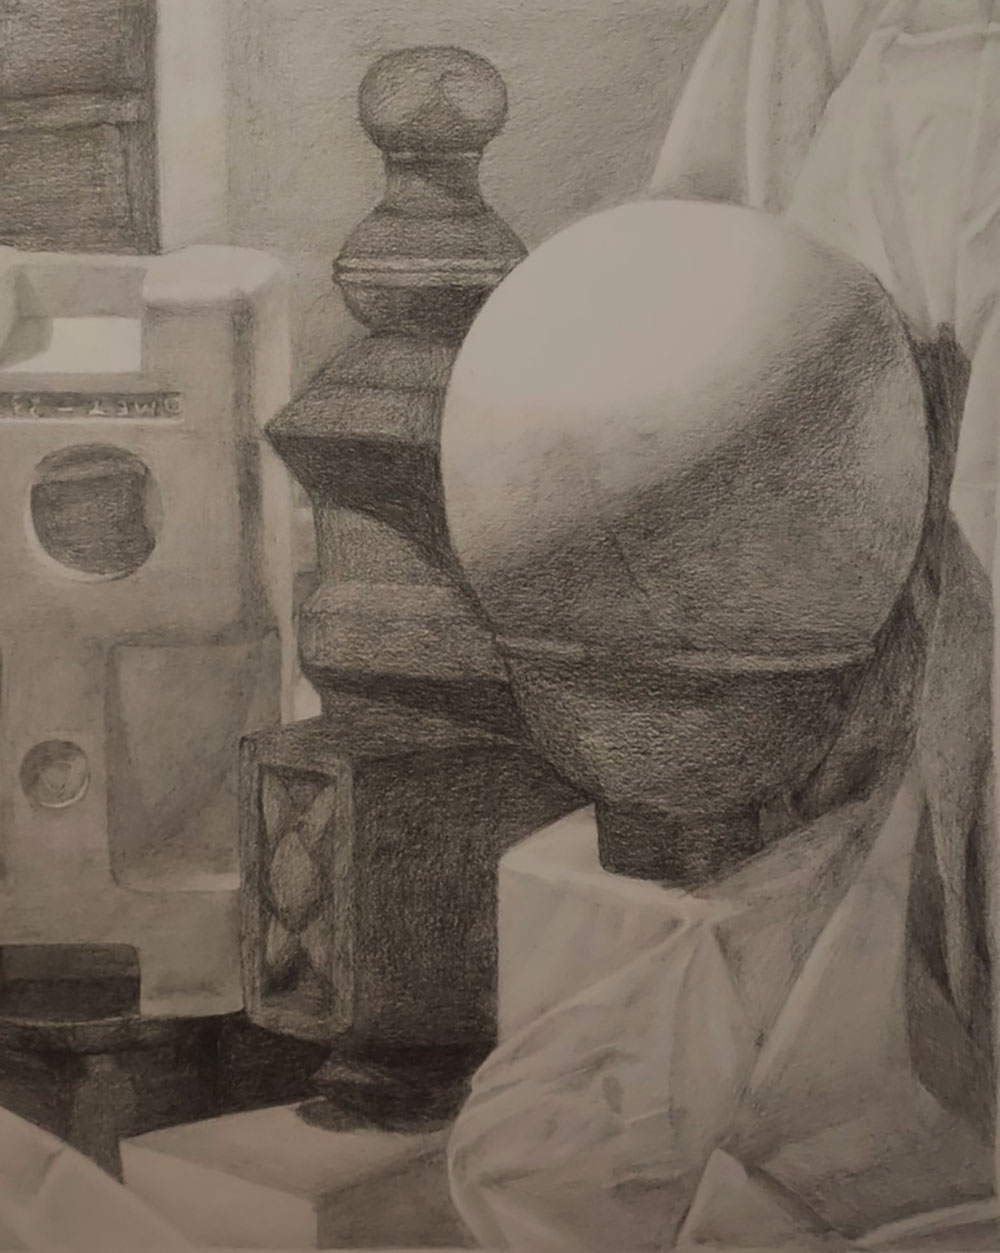 Still life drawing out of charcoal - specifically focused in on a sphere inside a bowl and a lamp stand. 